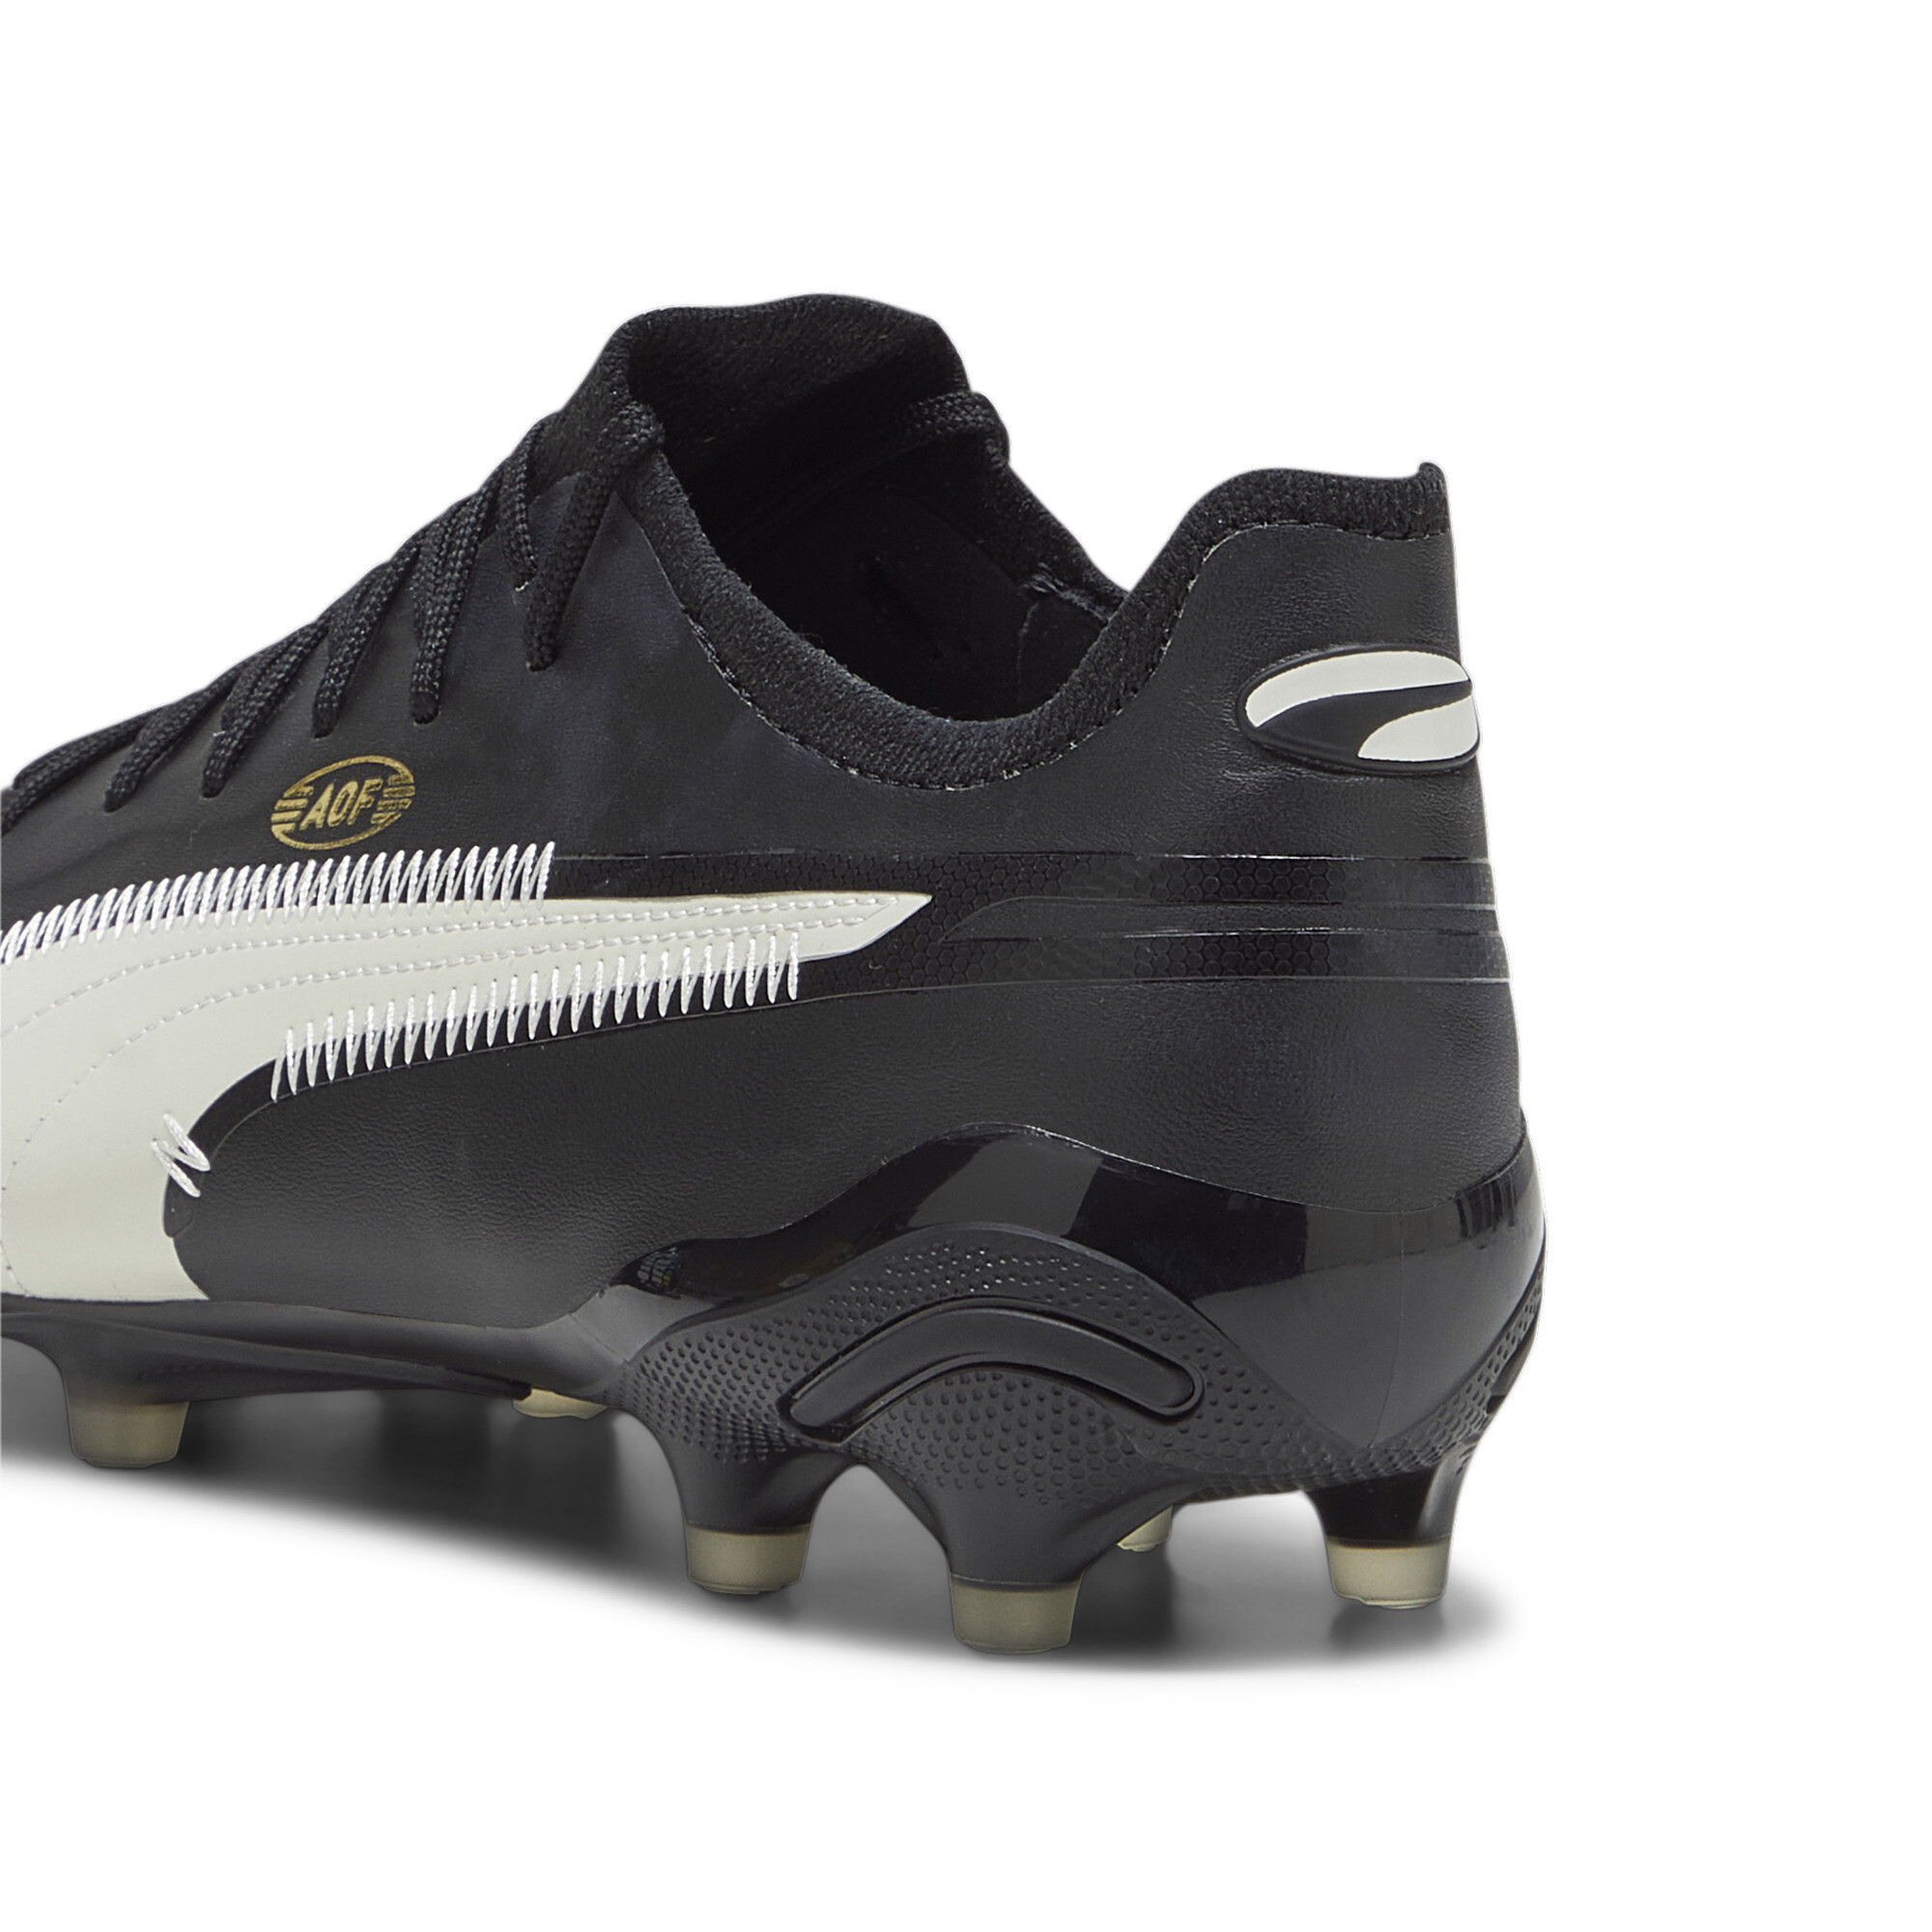 Men's PUMA KING ULTIMATE ART OF FOOTBALL FG/AG Football Boots In Black/Gold, Size EU 45